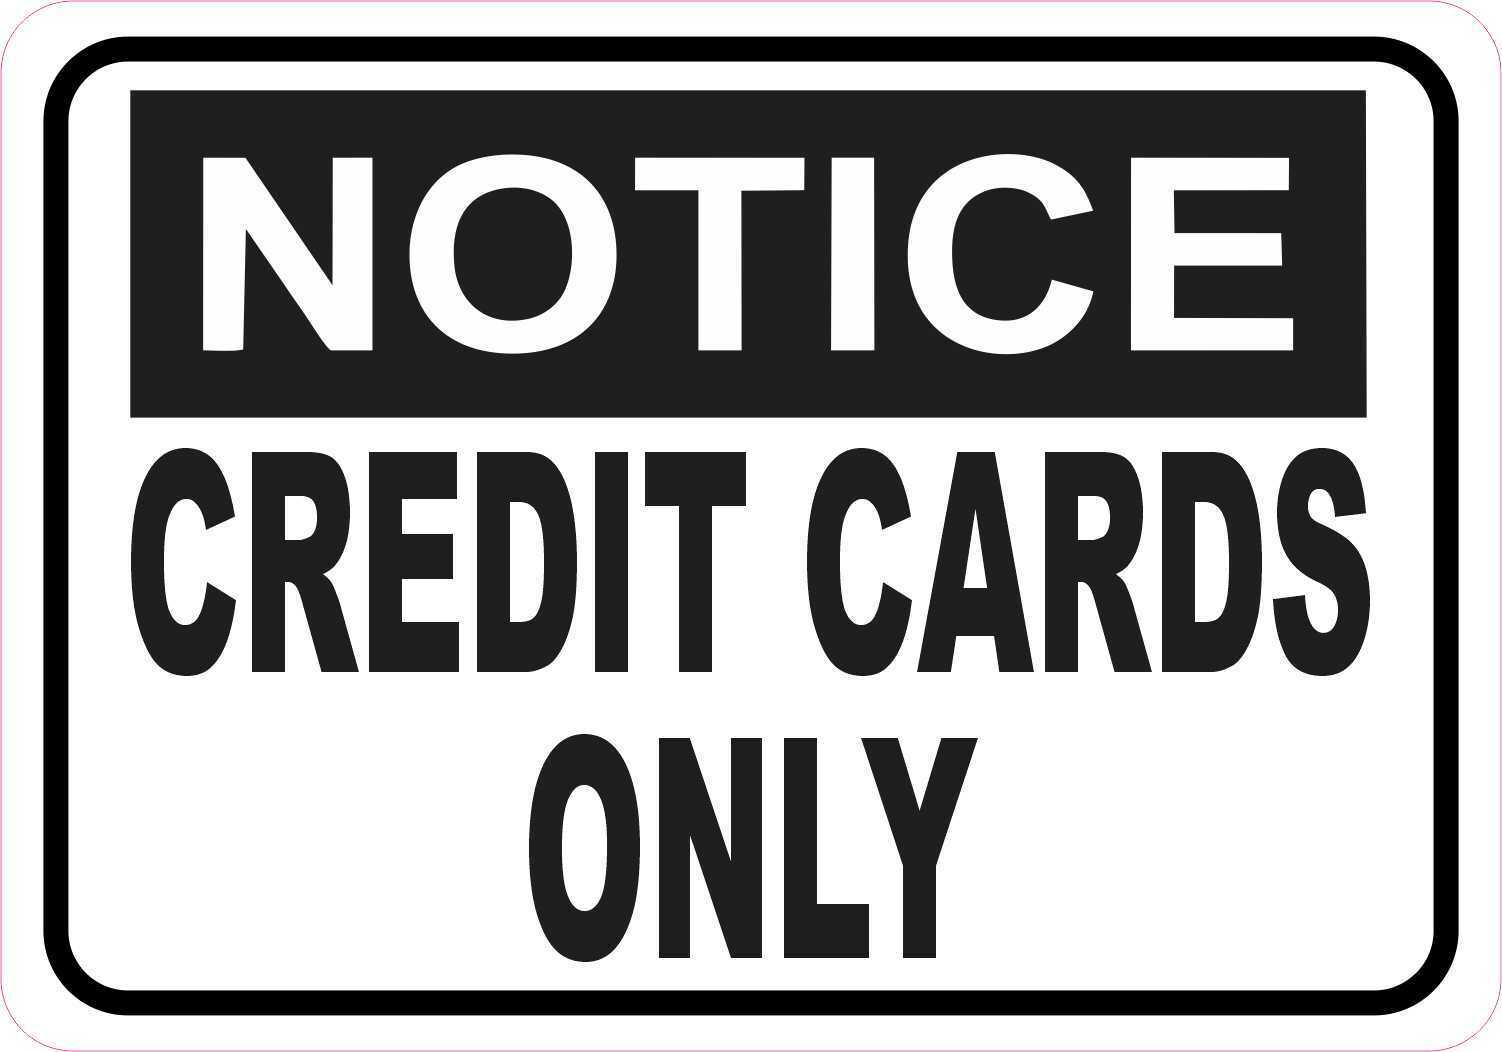 5inx3.5in Notice Credit Cards Only Vinyl Sticker Car Truck Vehicle Bumper Decal